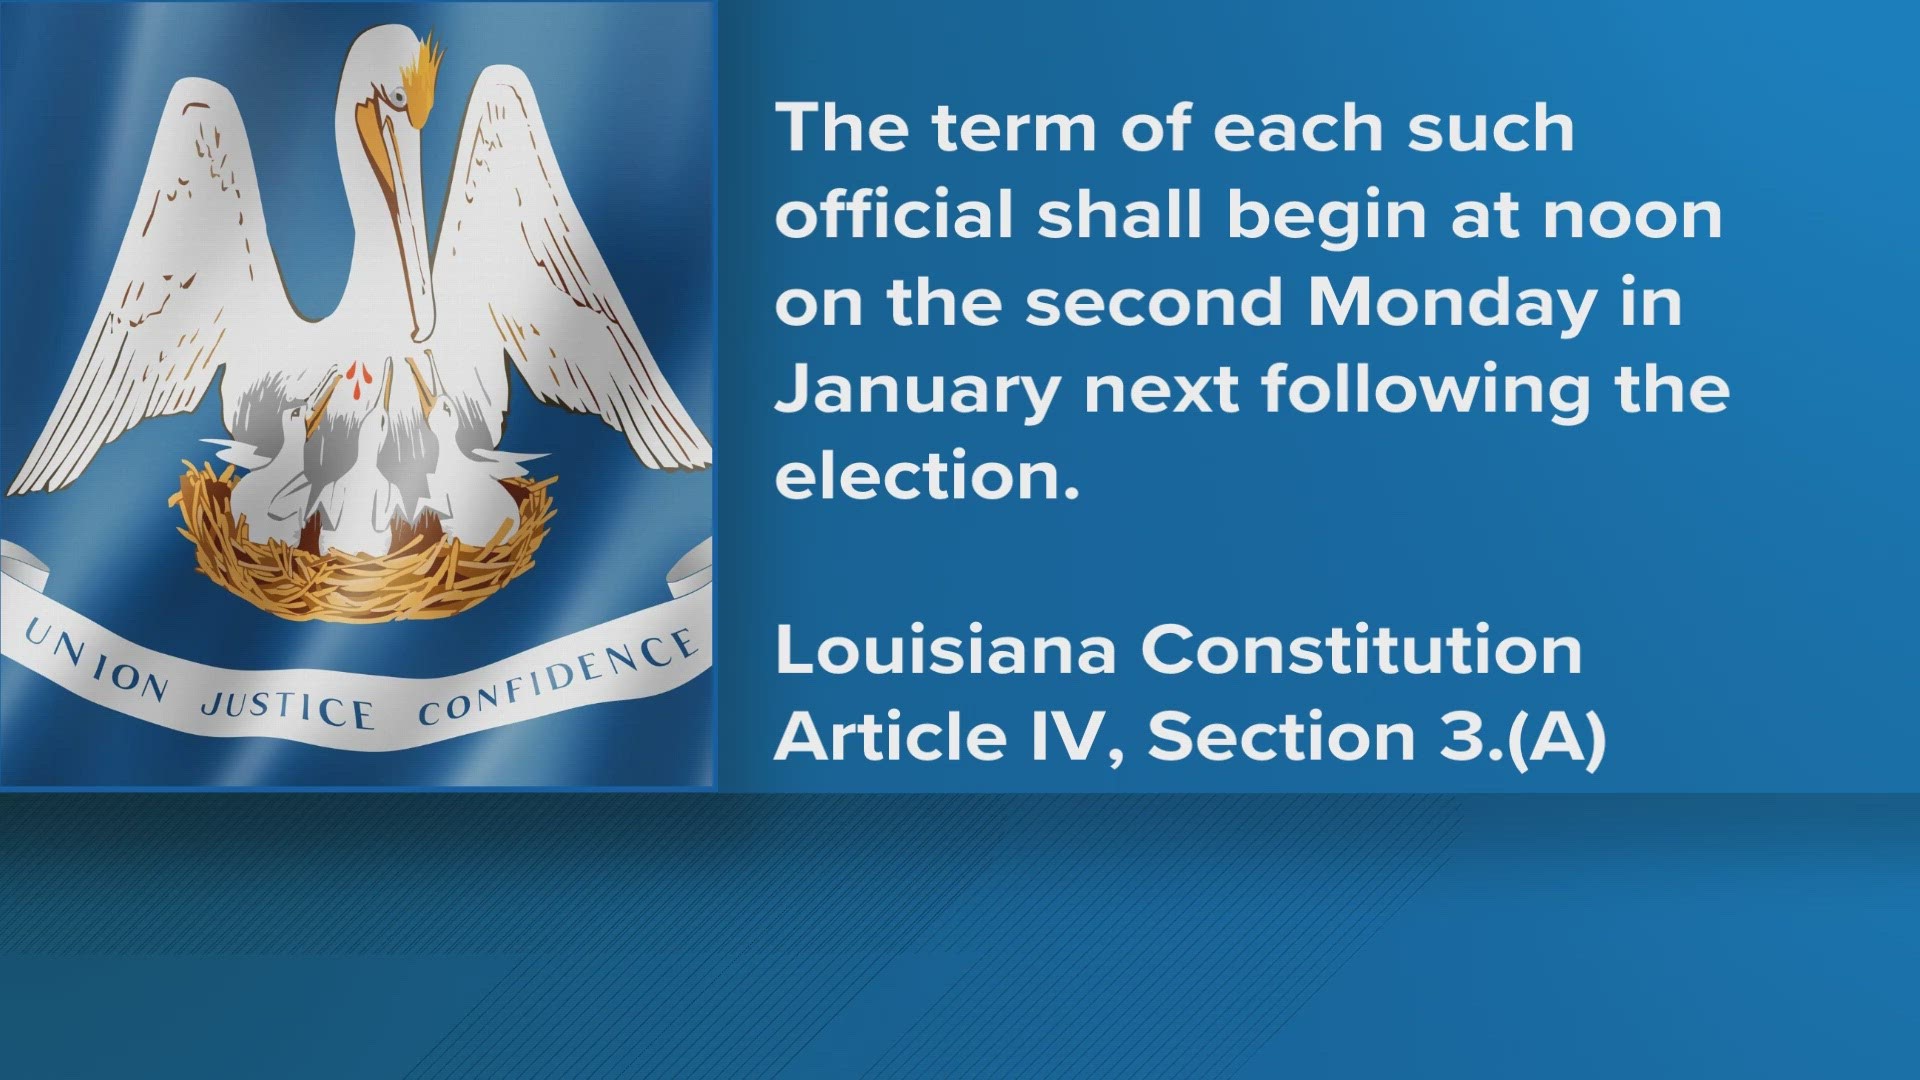 The inauguration ceremony is set for Sunday, Jan. 7 at 4:30 p.m. on the steps of Louisiana's State Capitol.